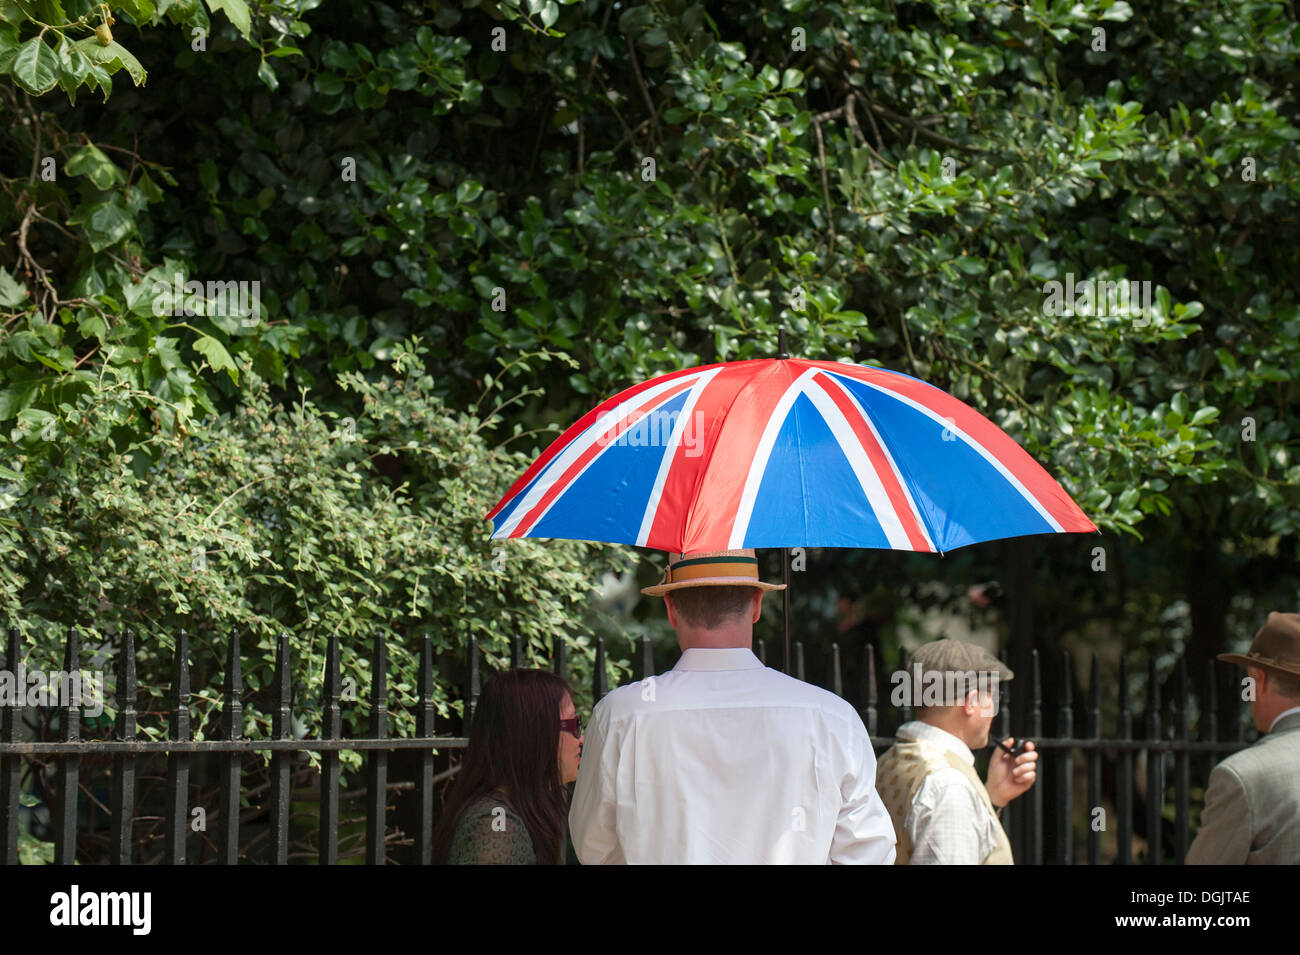 A Union Flag umbrella held in the queue of people waiting to enter Bedford Square Gardens for the start of the Chap Olympiad. Stock Photo